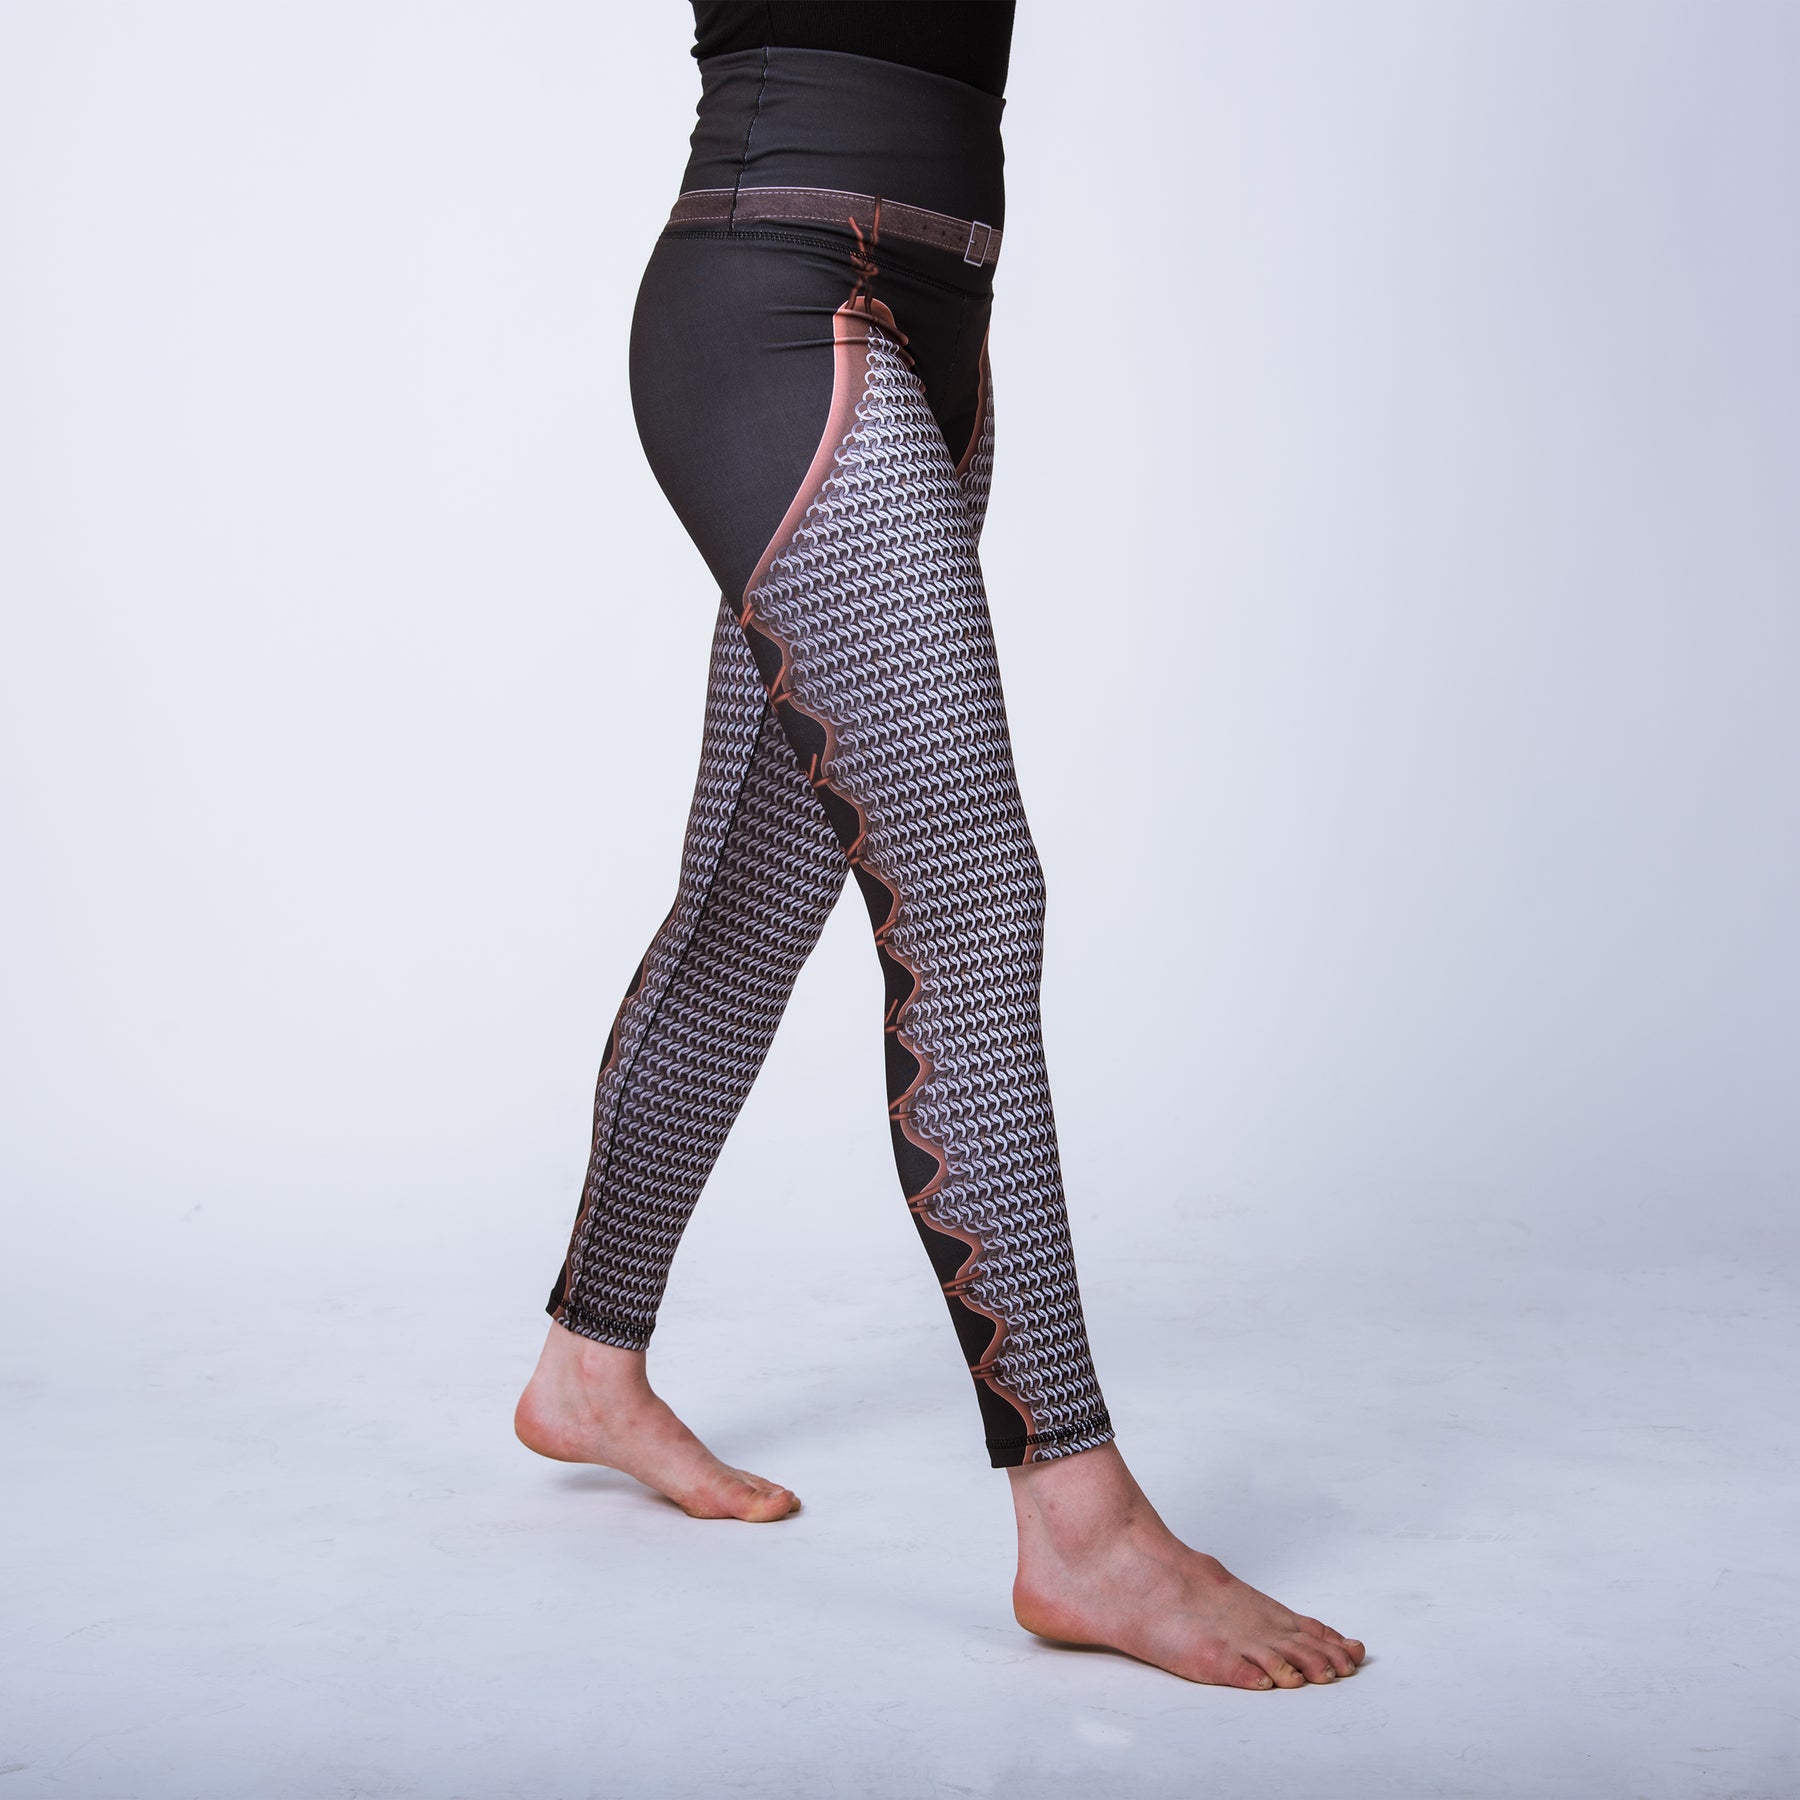 Chain Mail Chausses Leggings, 9mm Round Riveted With Solid Rings Leggings,  UKE-092 Valentine's Day -  Norway